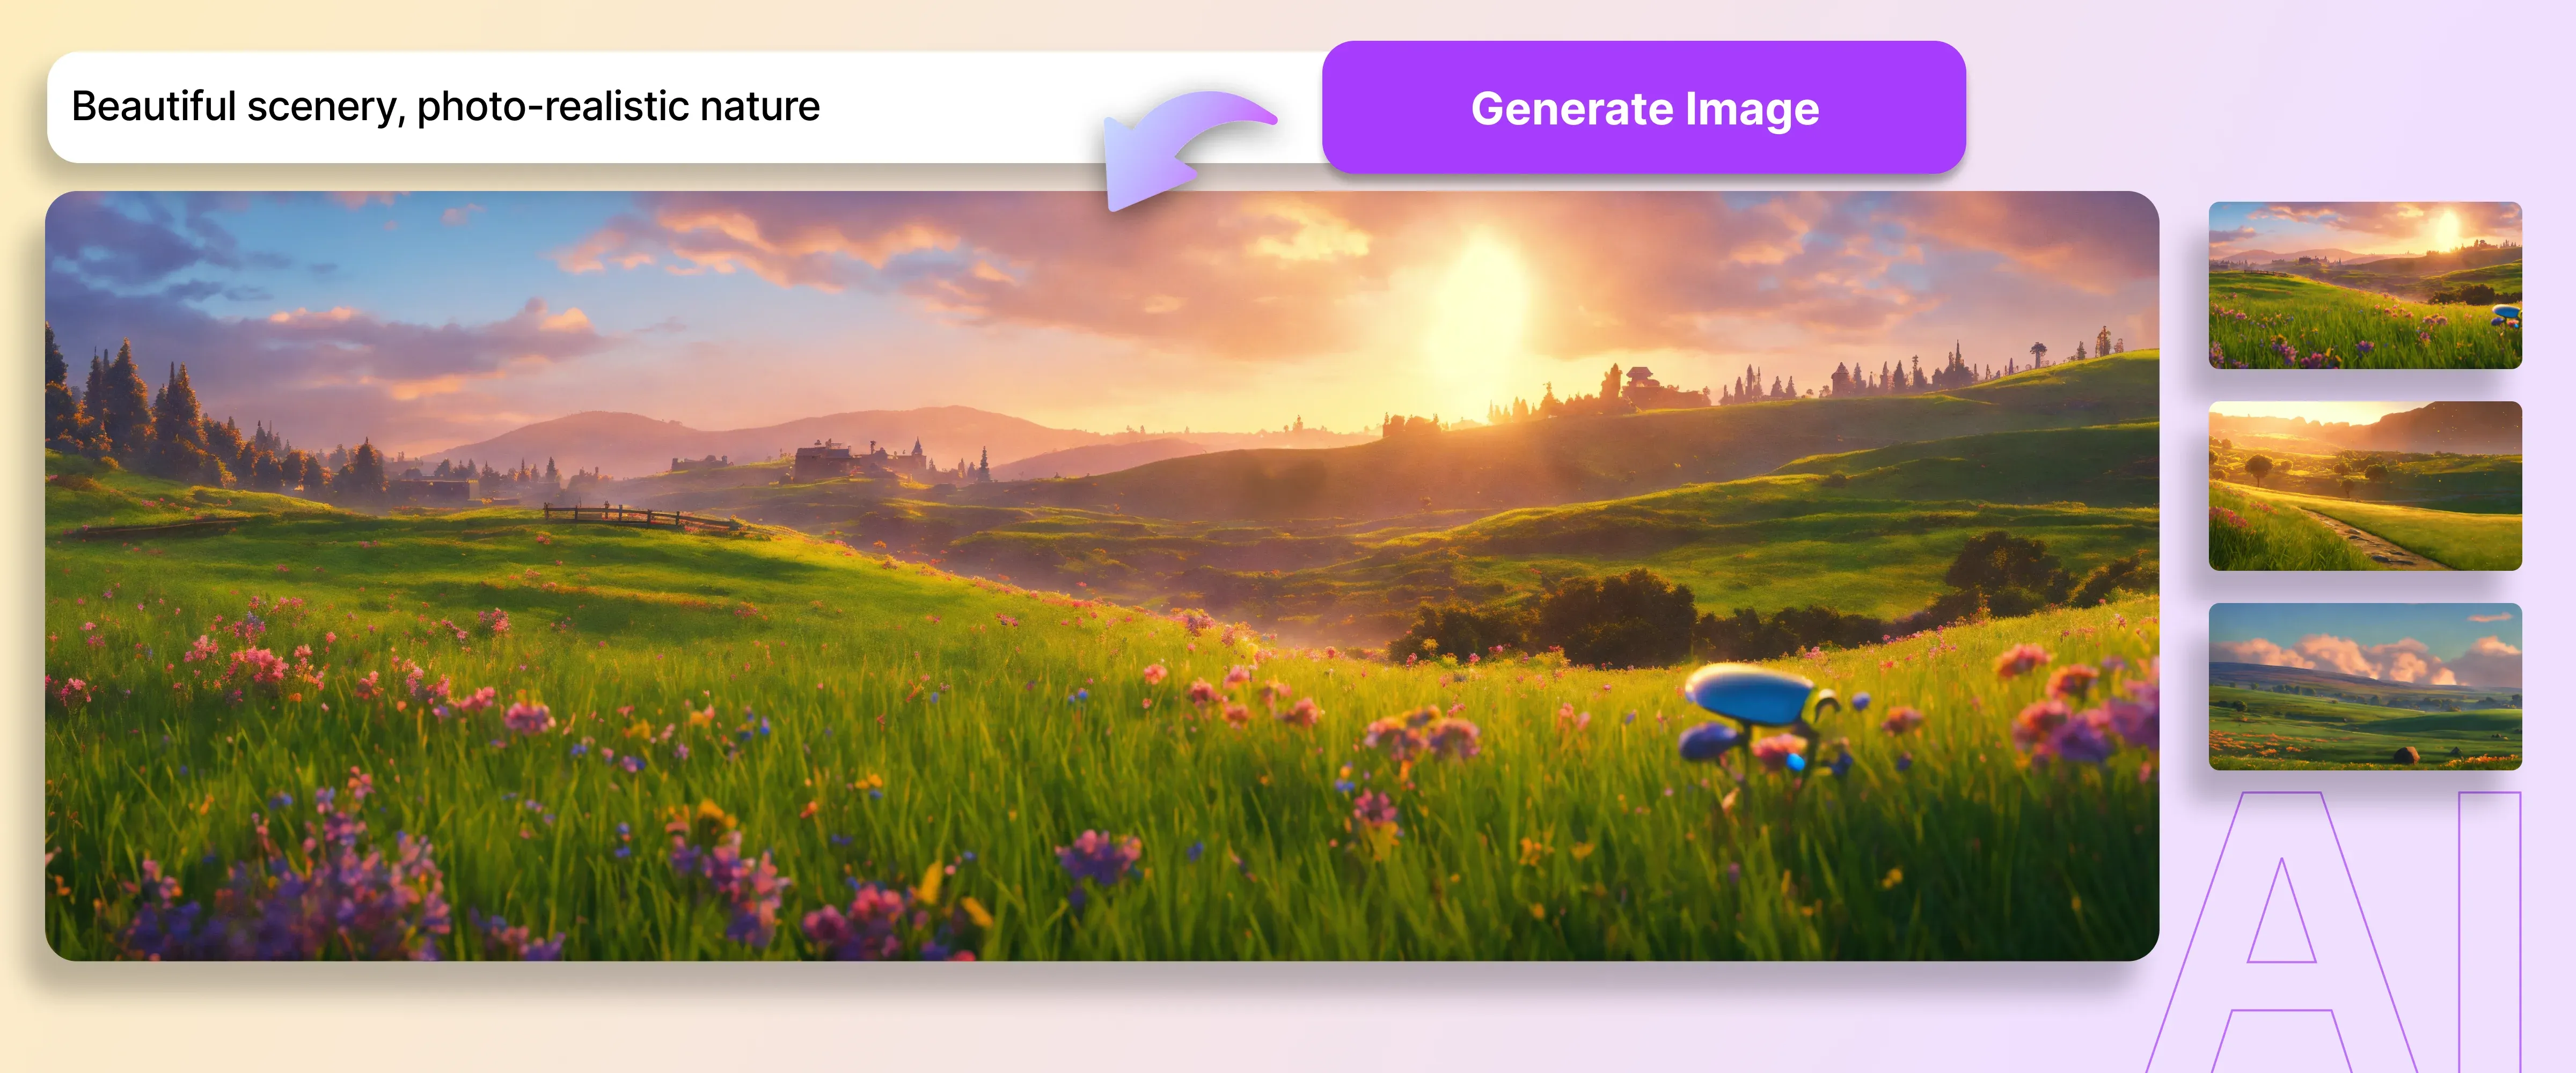 7 Tips for Generating Great Landscape Pictures cover